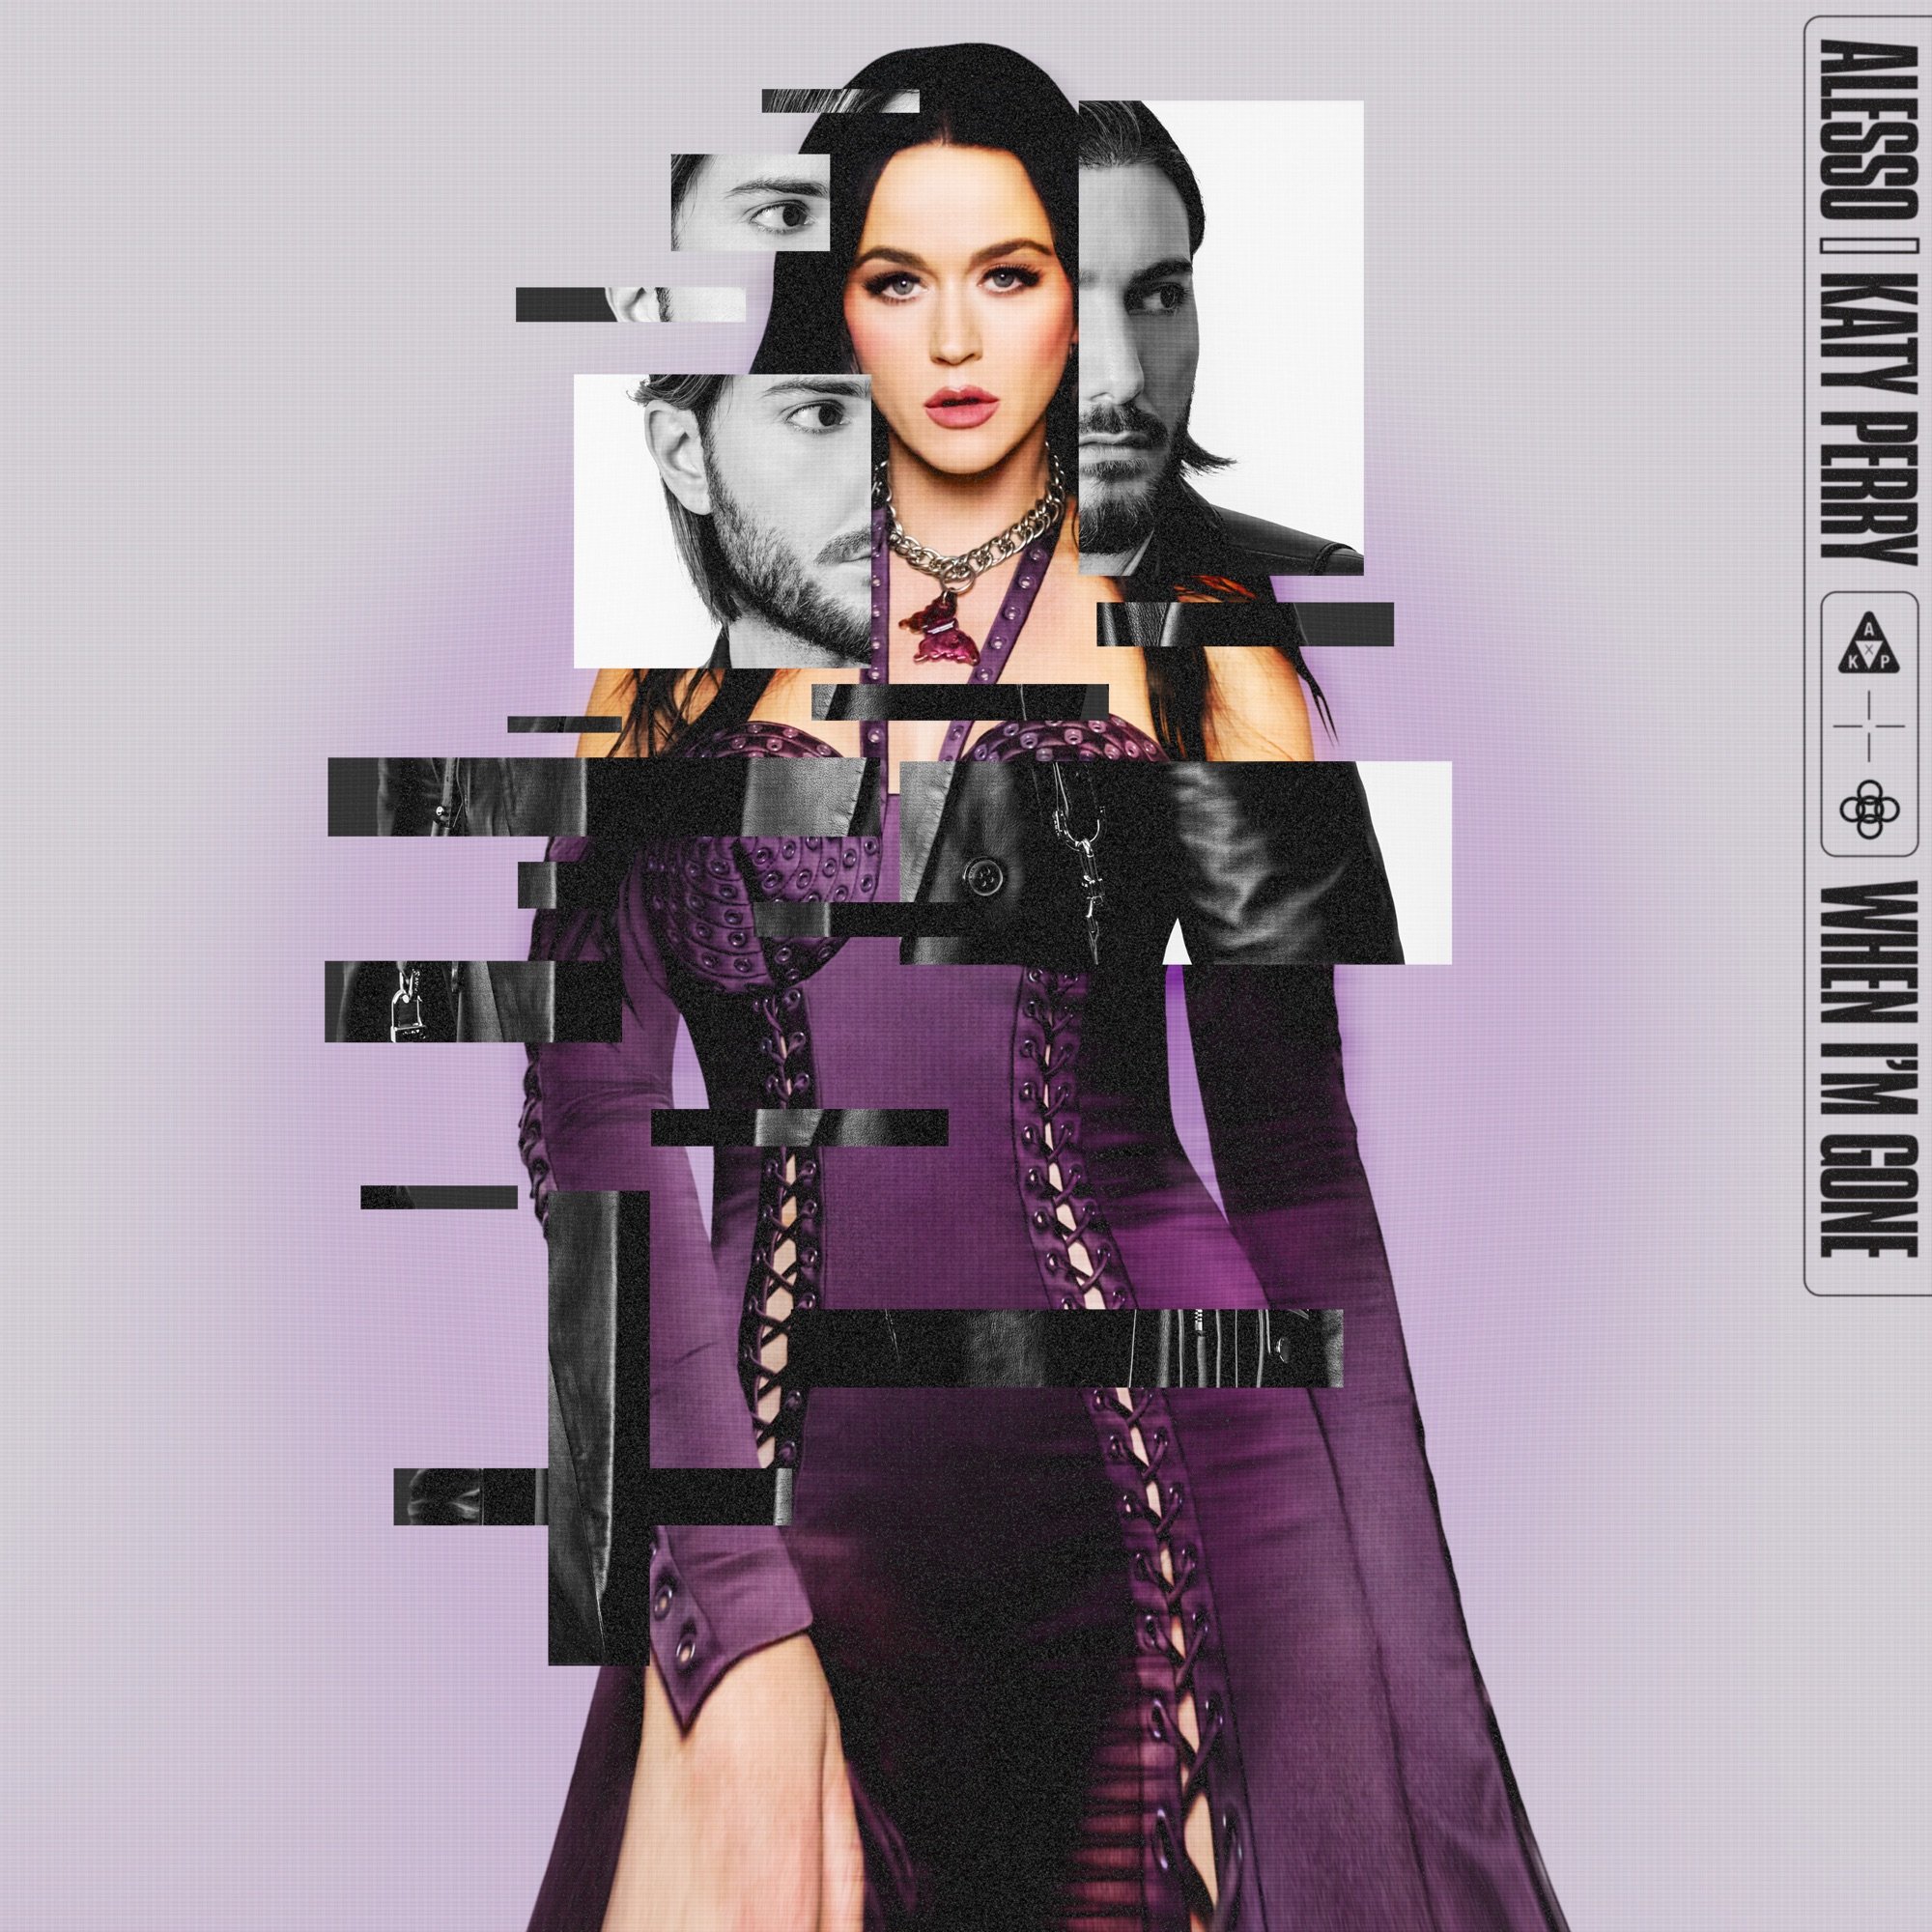 When I'm Gone — Alesso & Katy Perry | Last.fm